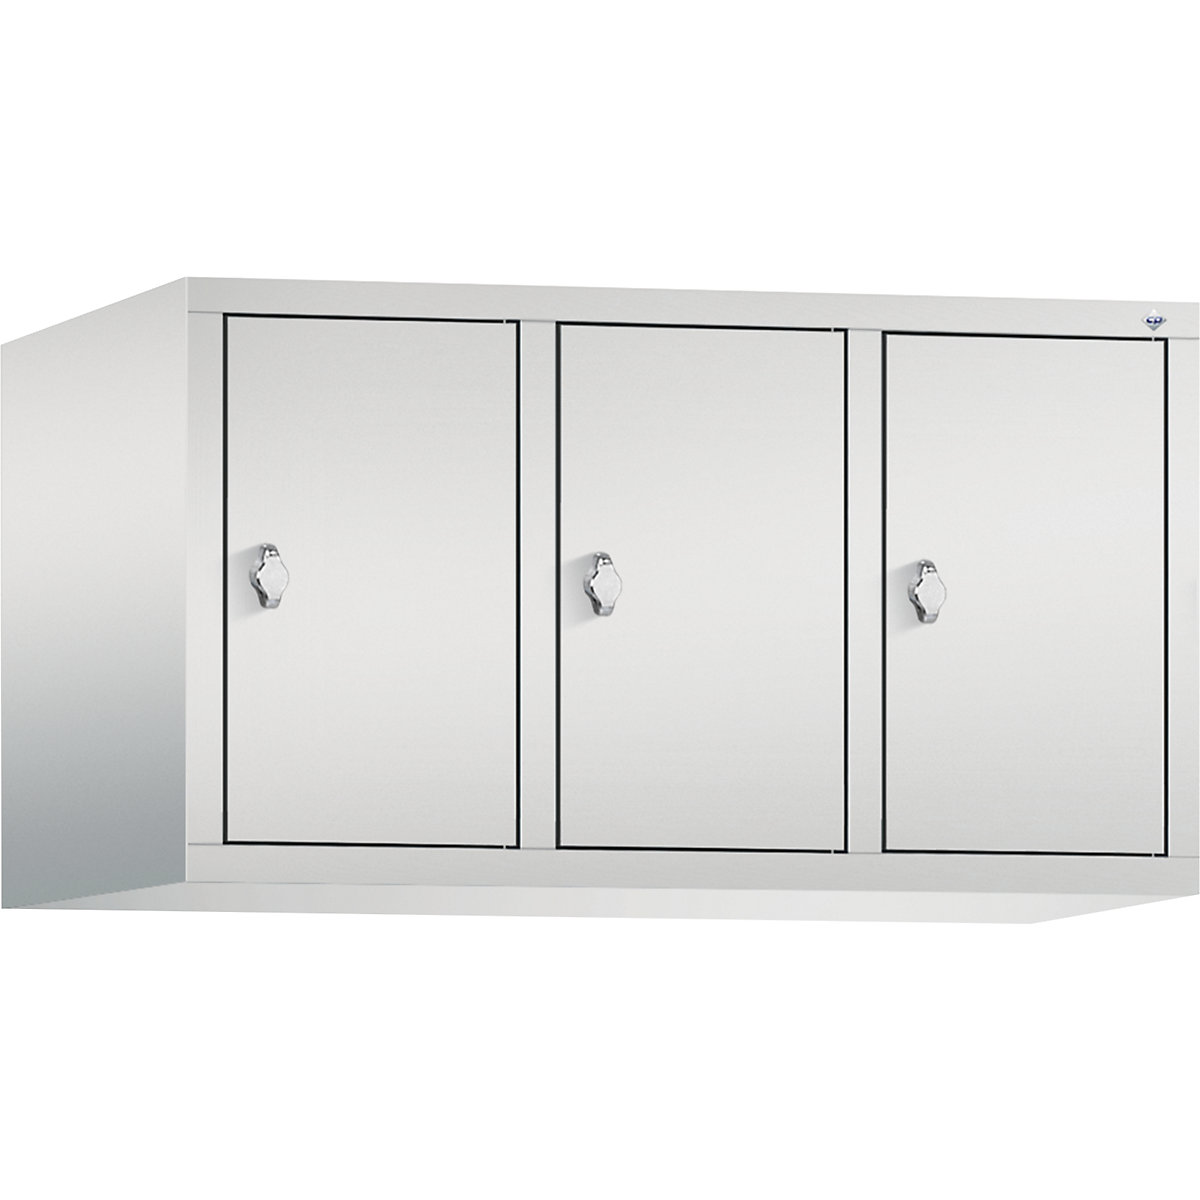 CLASSIC add-on cupboard – C+P, 3 compartments, compartment width 300 mm, light grey-6